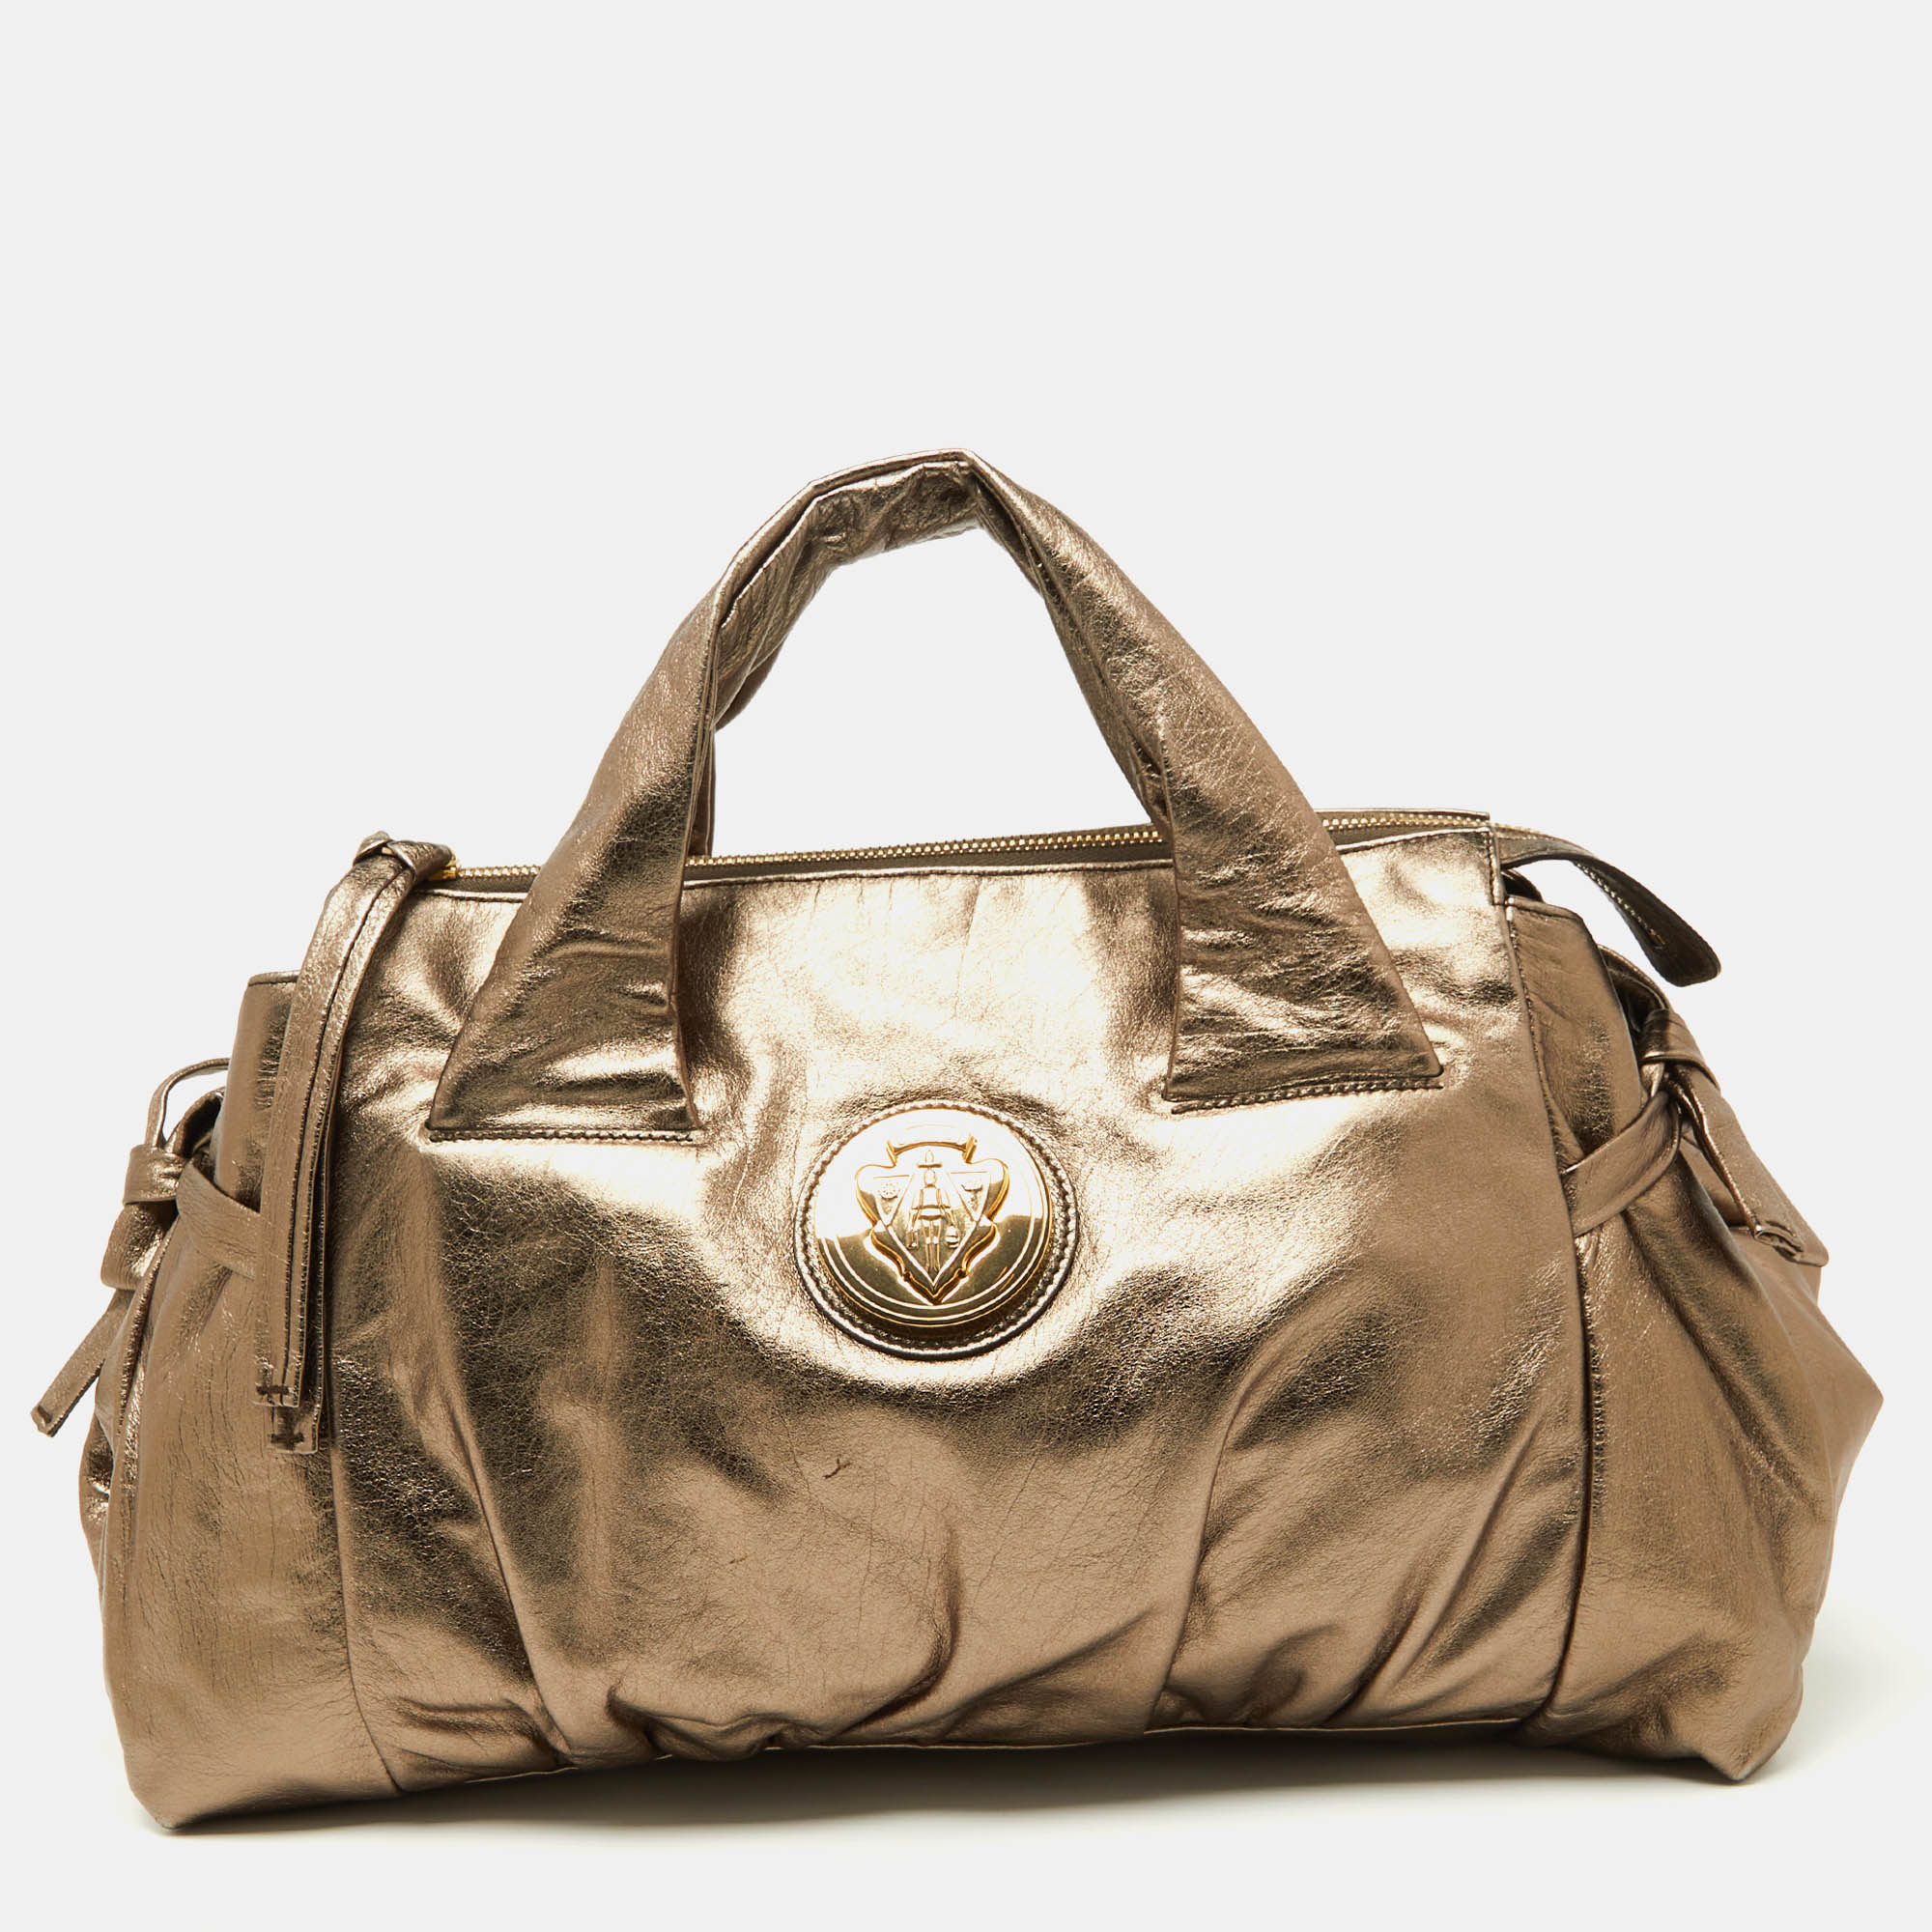 Pre-owned Gucci Metallic Gold Leather Hysteria Tote